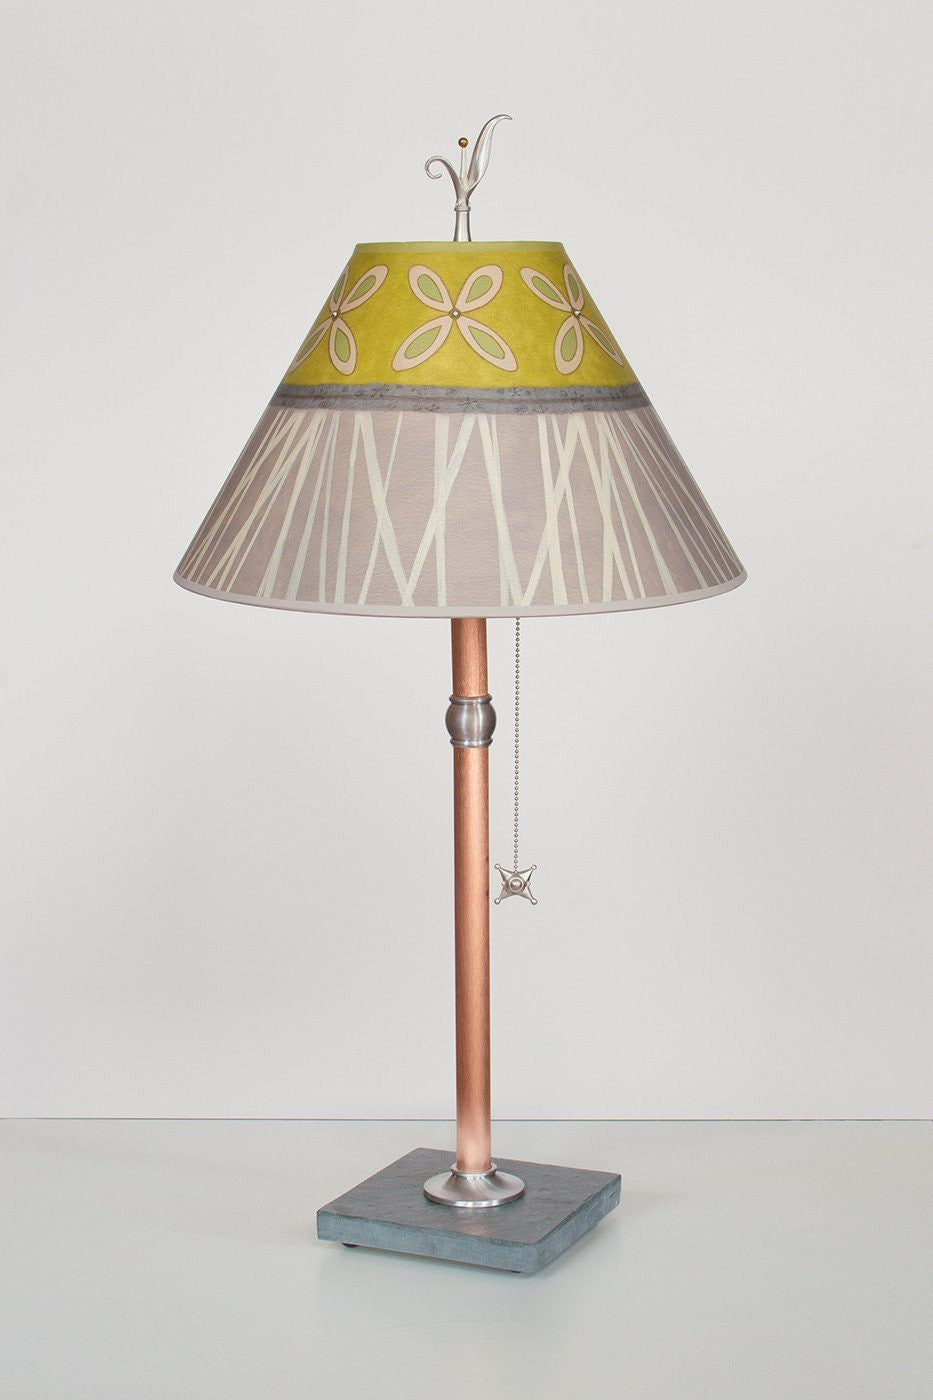 Janna Ugone & Co Table Lamps Copper Table Lamp with Medium Conical Shade in Kiwi